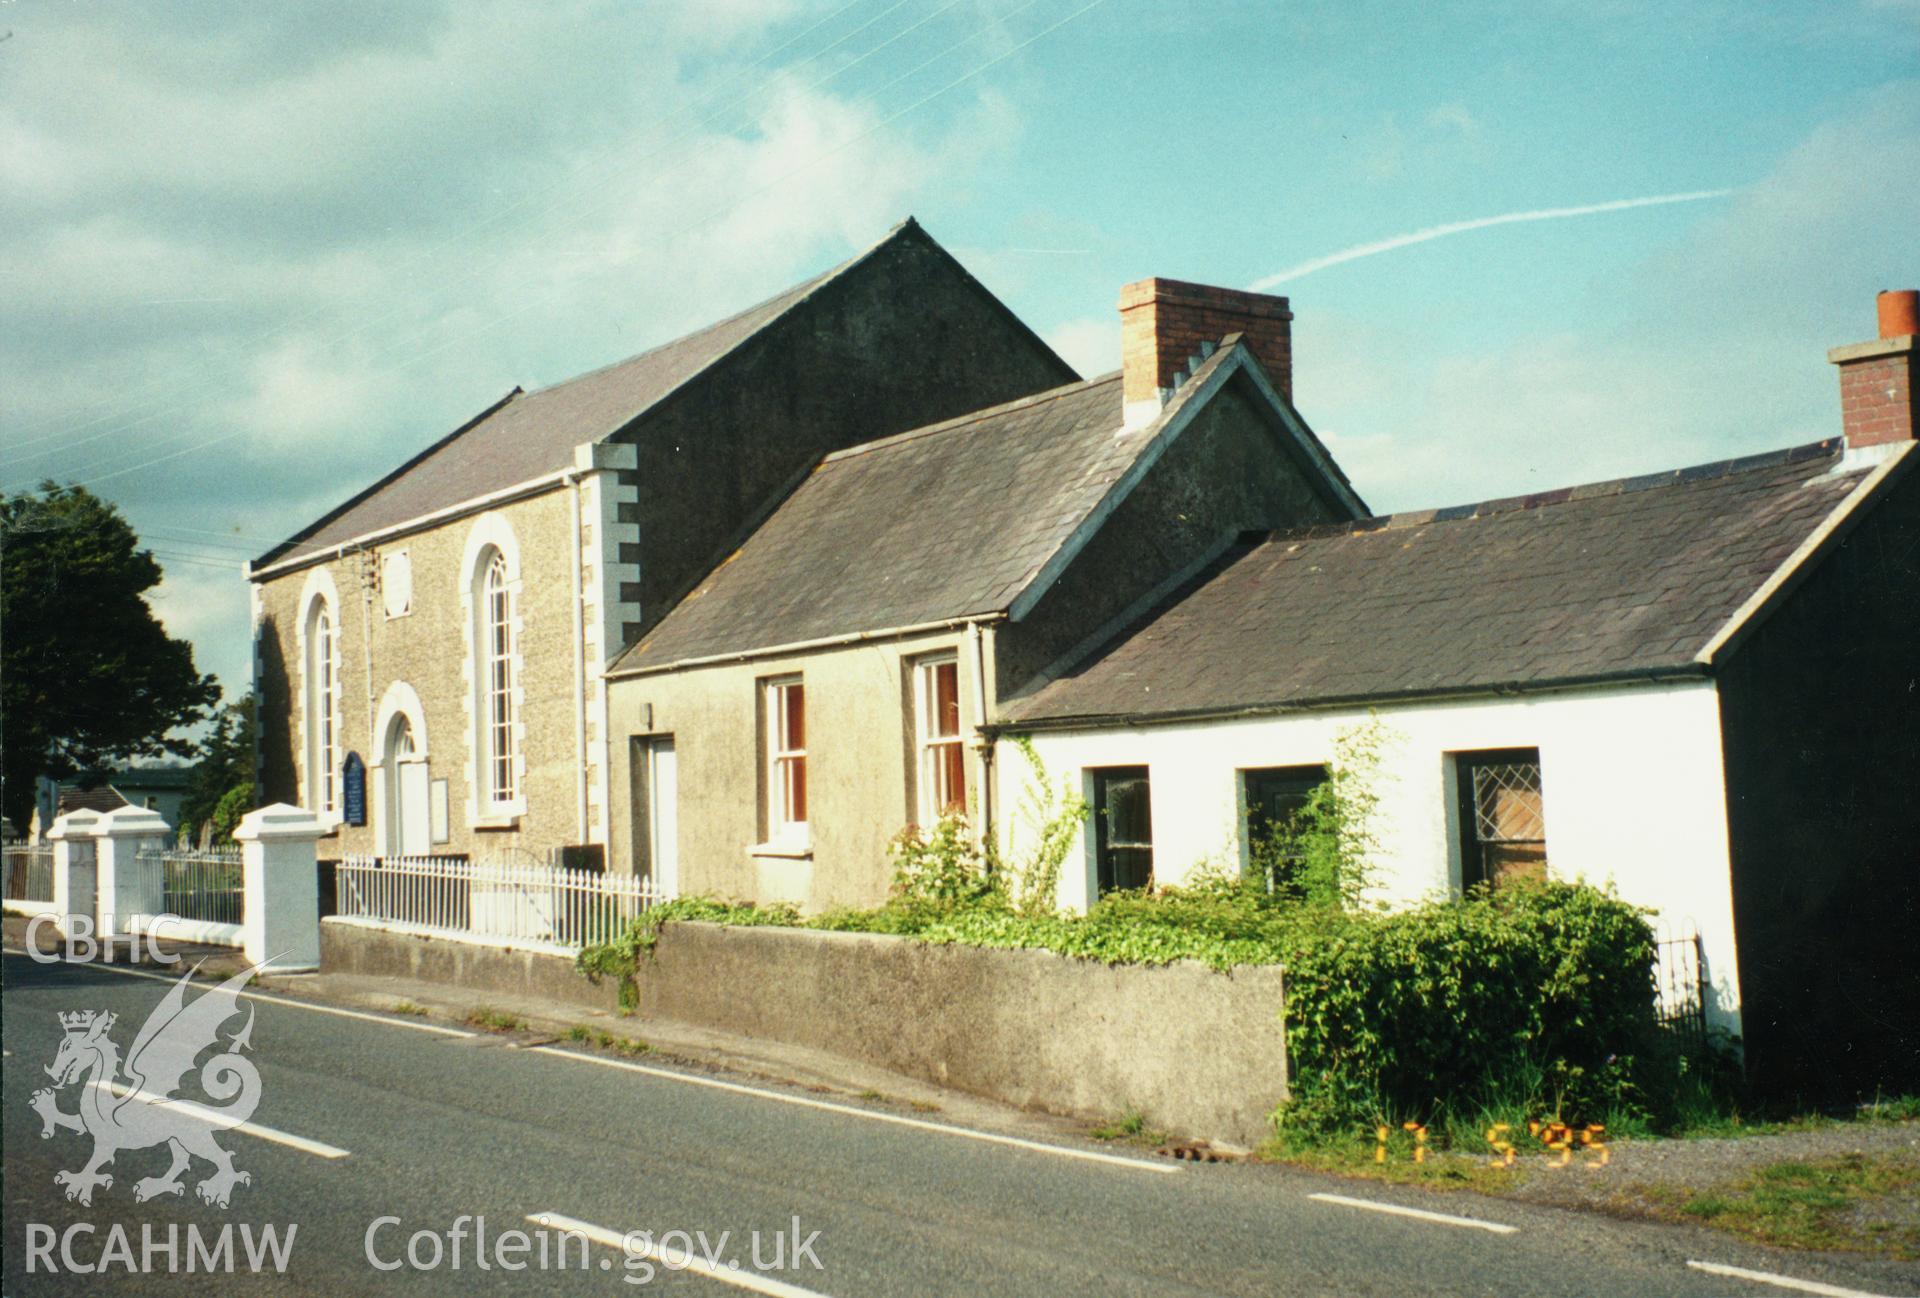 Digital copy of a colour photograph showing exterior view of Zion Calvinistic Methodist Chapel, Begelly, taken by Robert Scourfield, 1996.